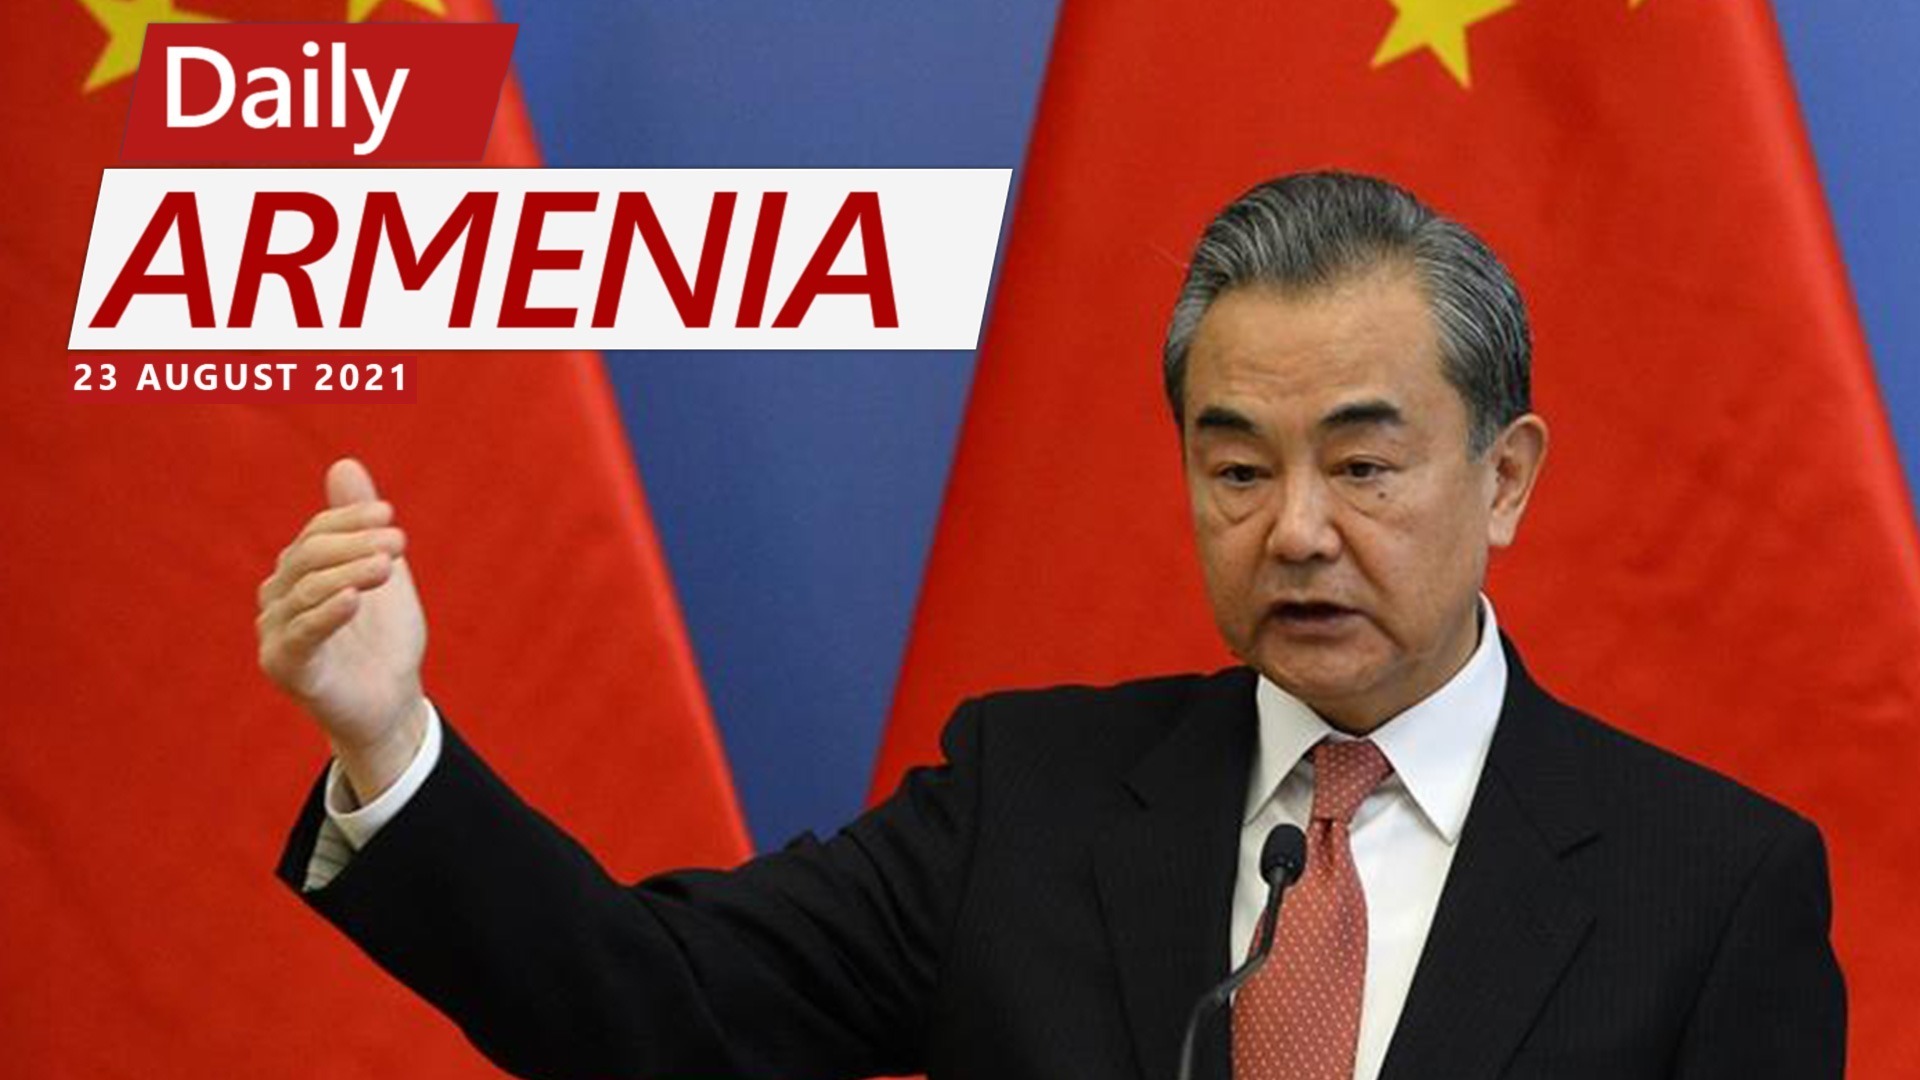 “Armenia-China relations should be taken to the next level”, Chinese official